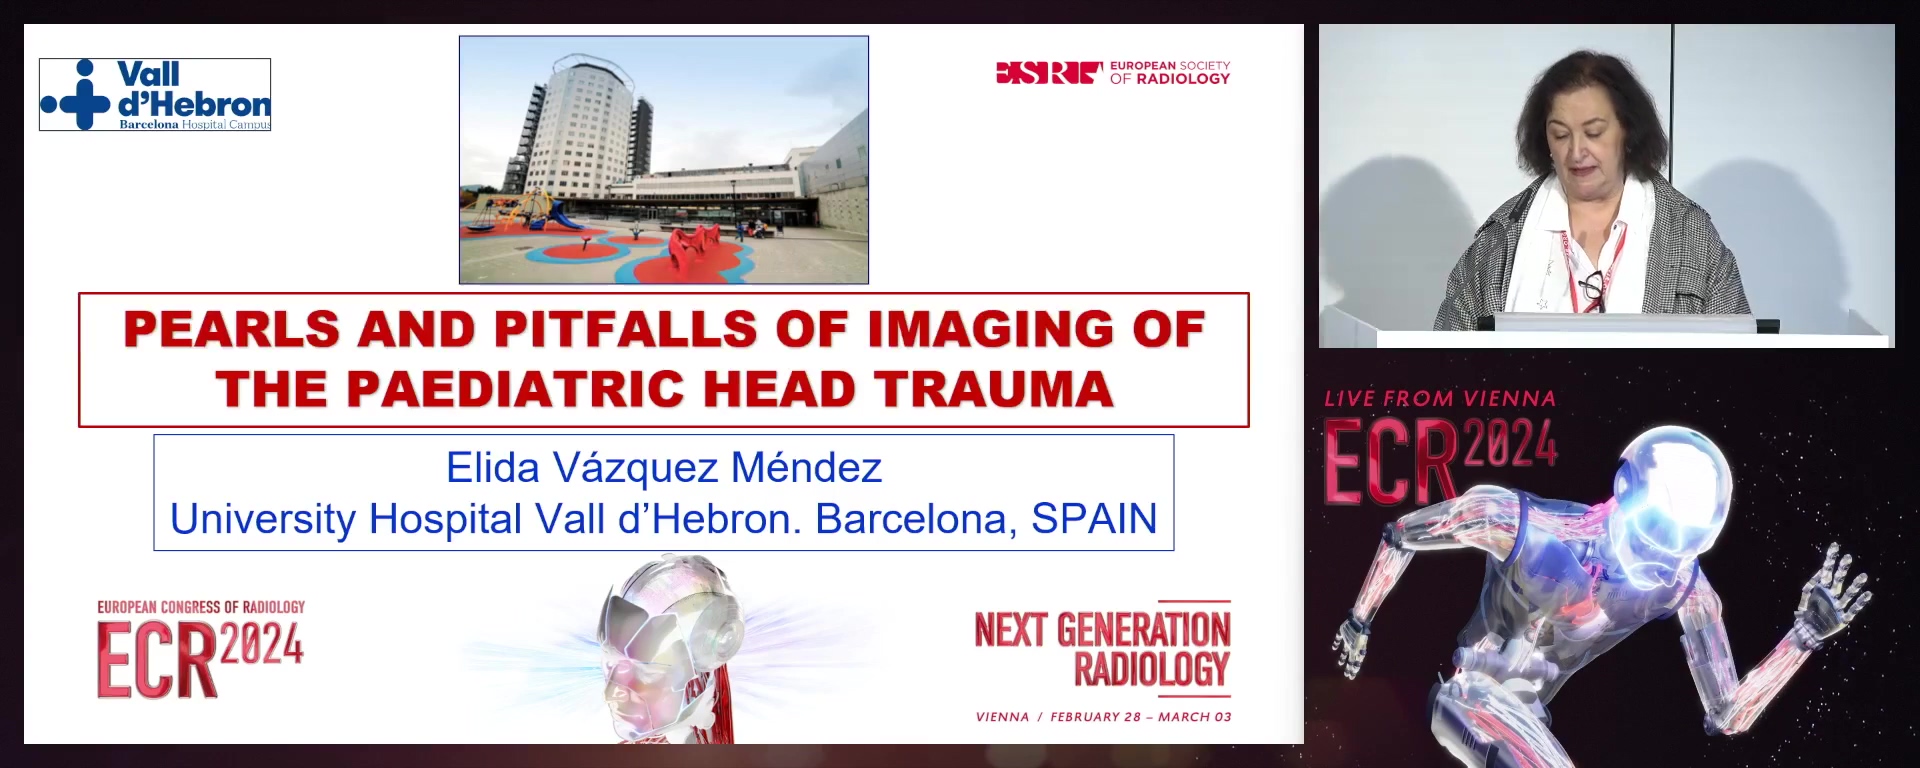 Pearls and pitfalls of imaging of the paediatric head trauma